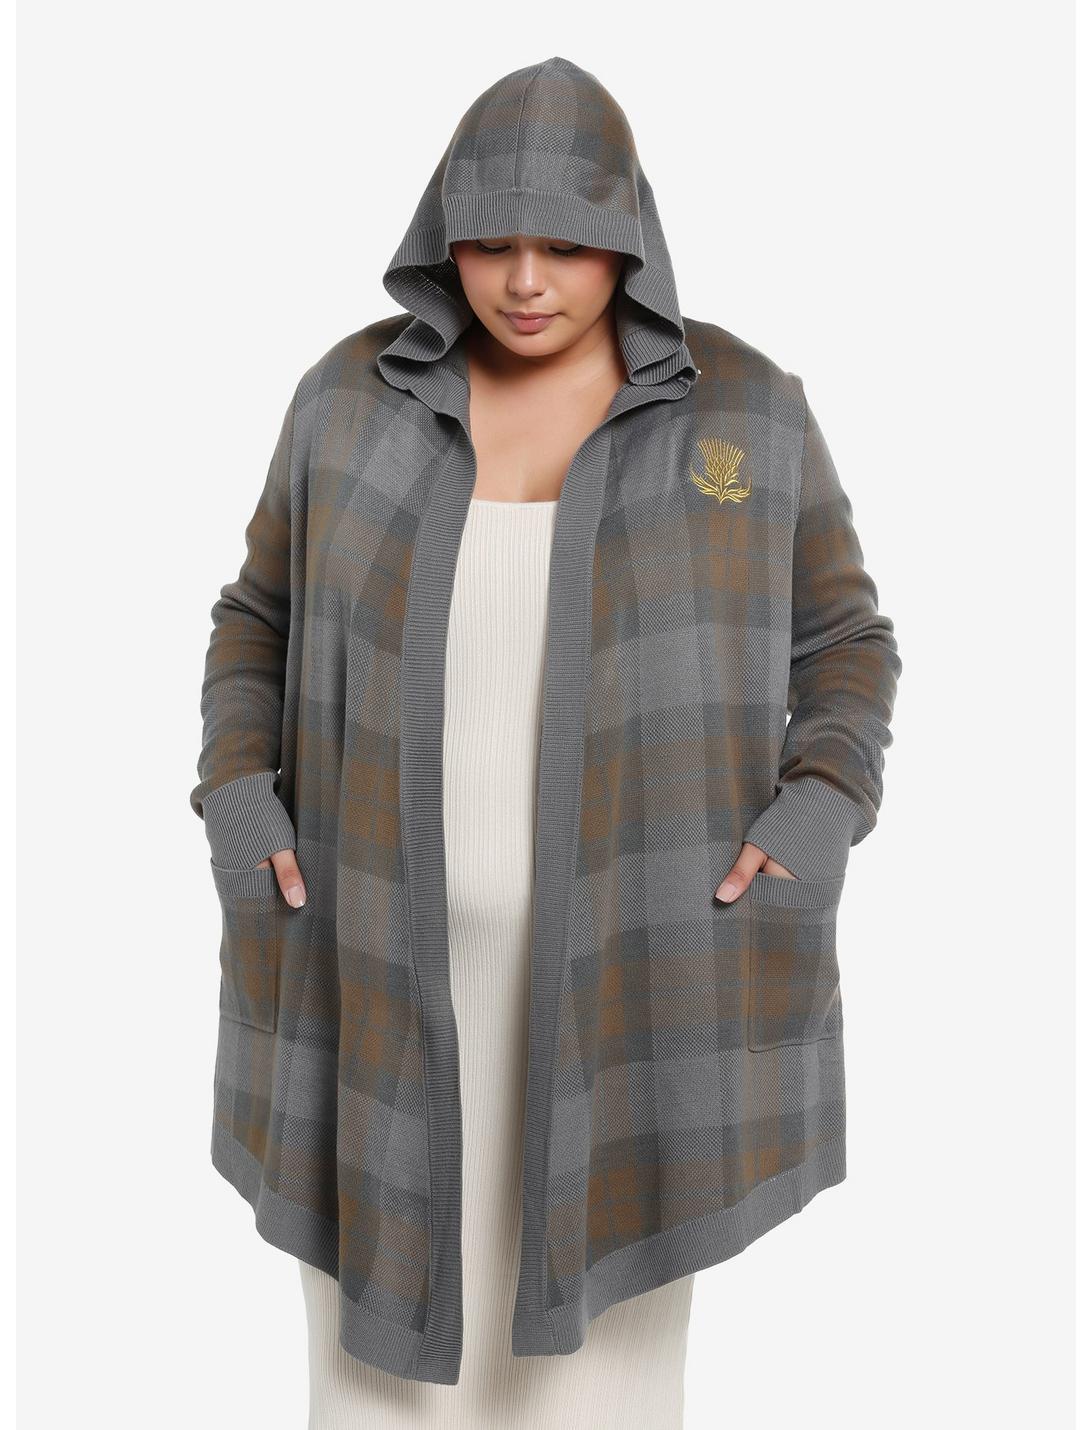 Her Universe Outlander Plaid Hooded Cardigan Plus Size Her Universe Exclusive, MULTI, hi-res